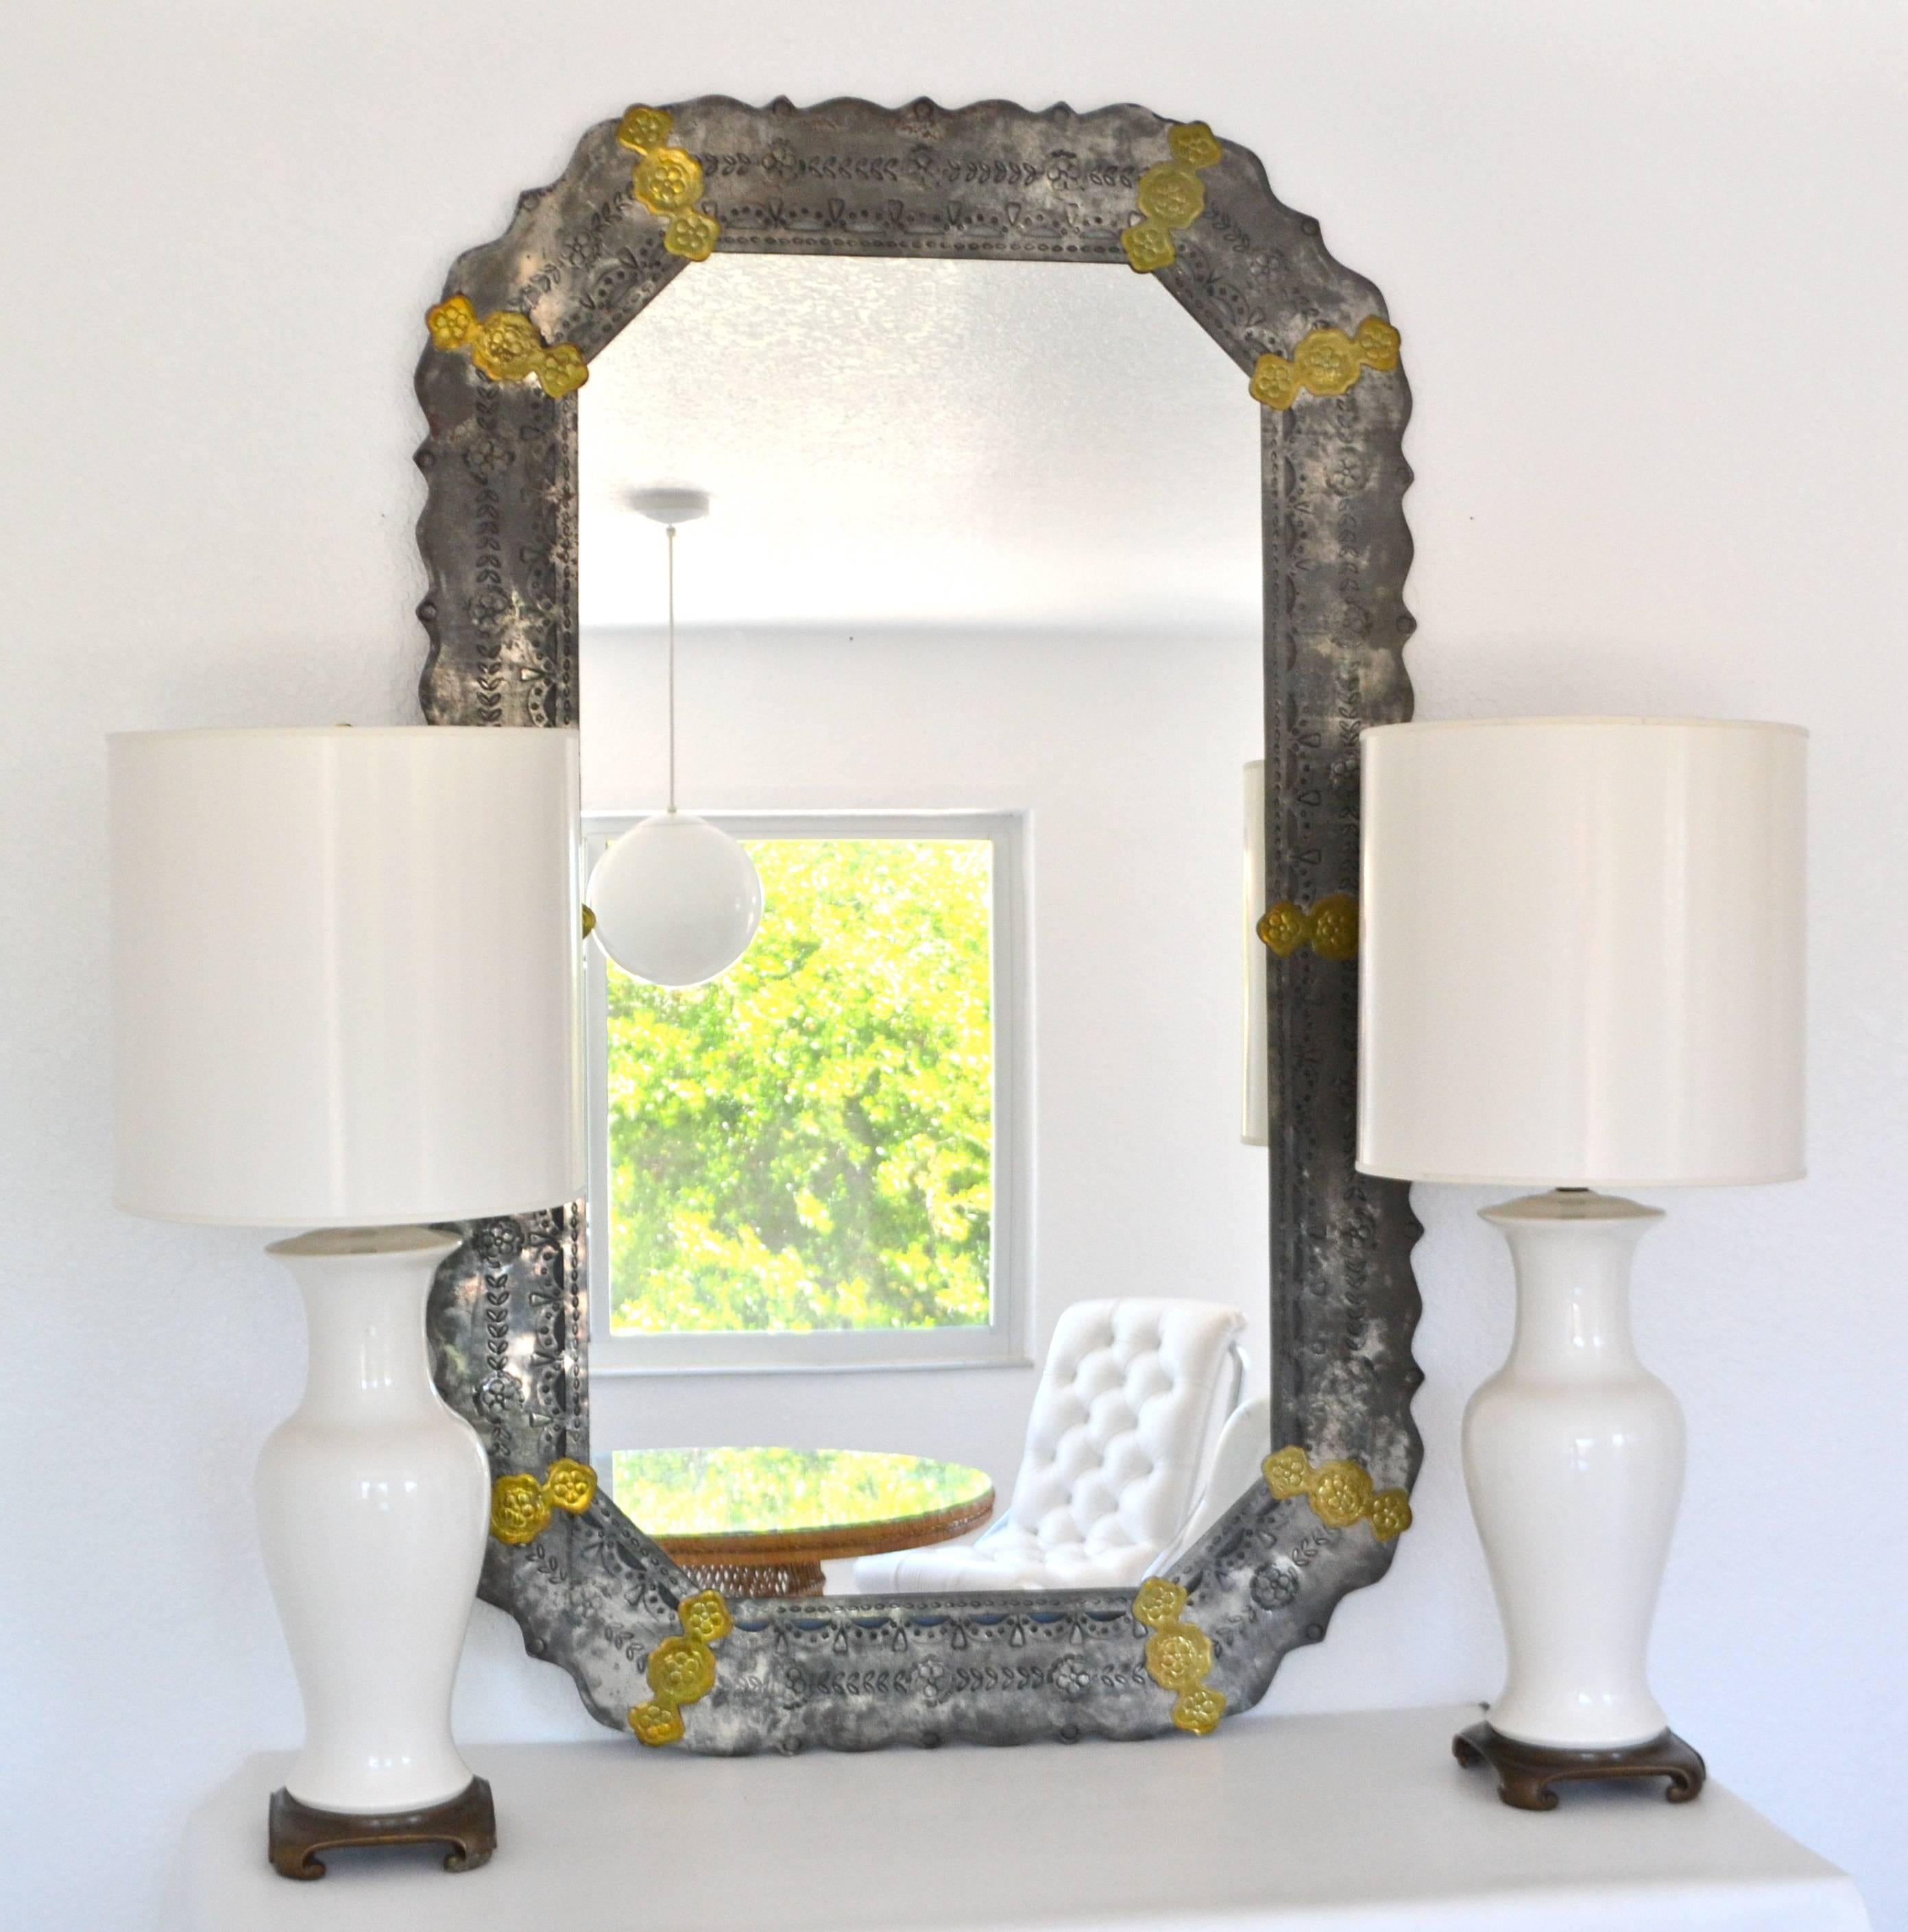 Stunning midcentury etched metal wall mirror, circa 1970s. This striking artisan crafted and highly decorative repousse metal mantel mirror is embellished with brass accents.